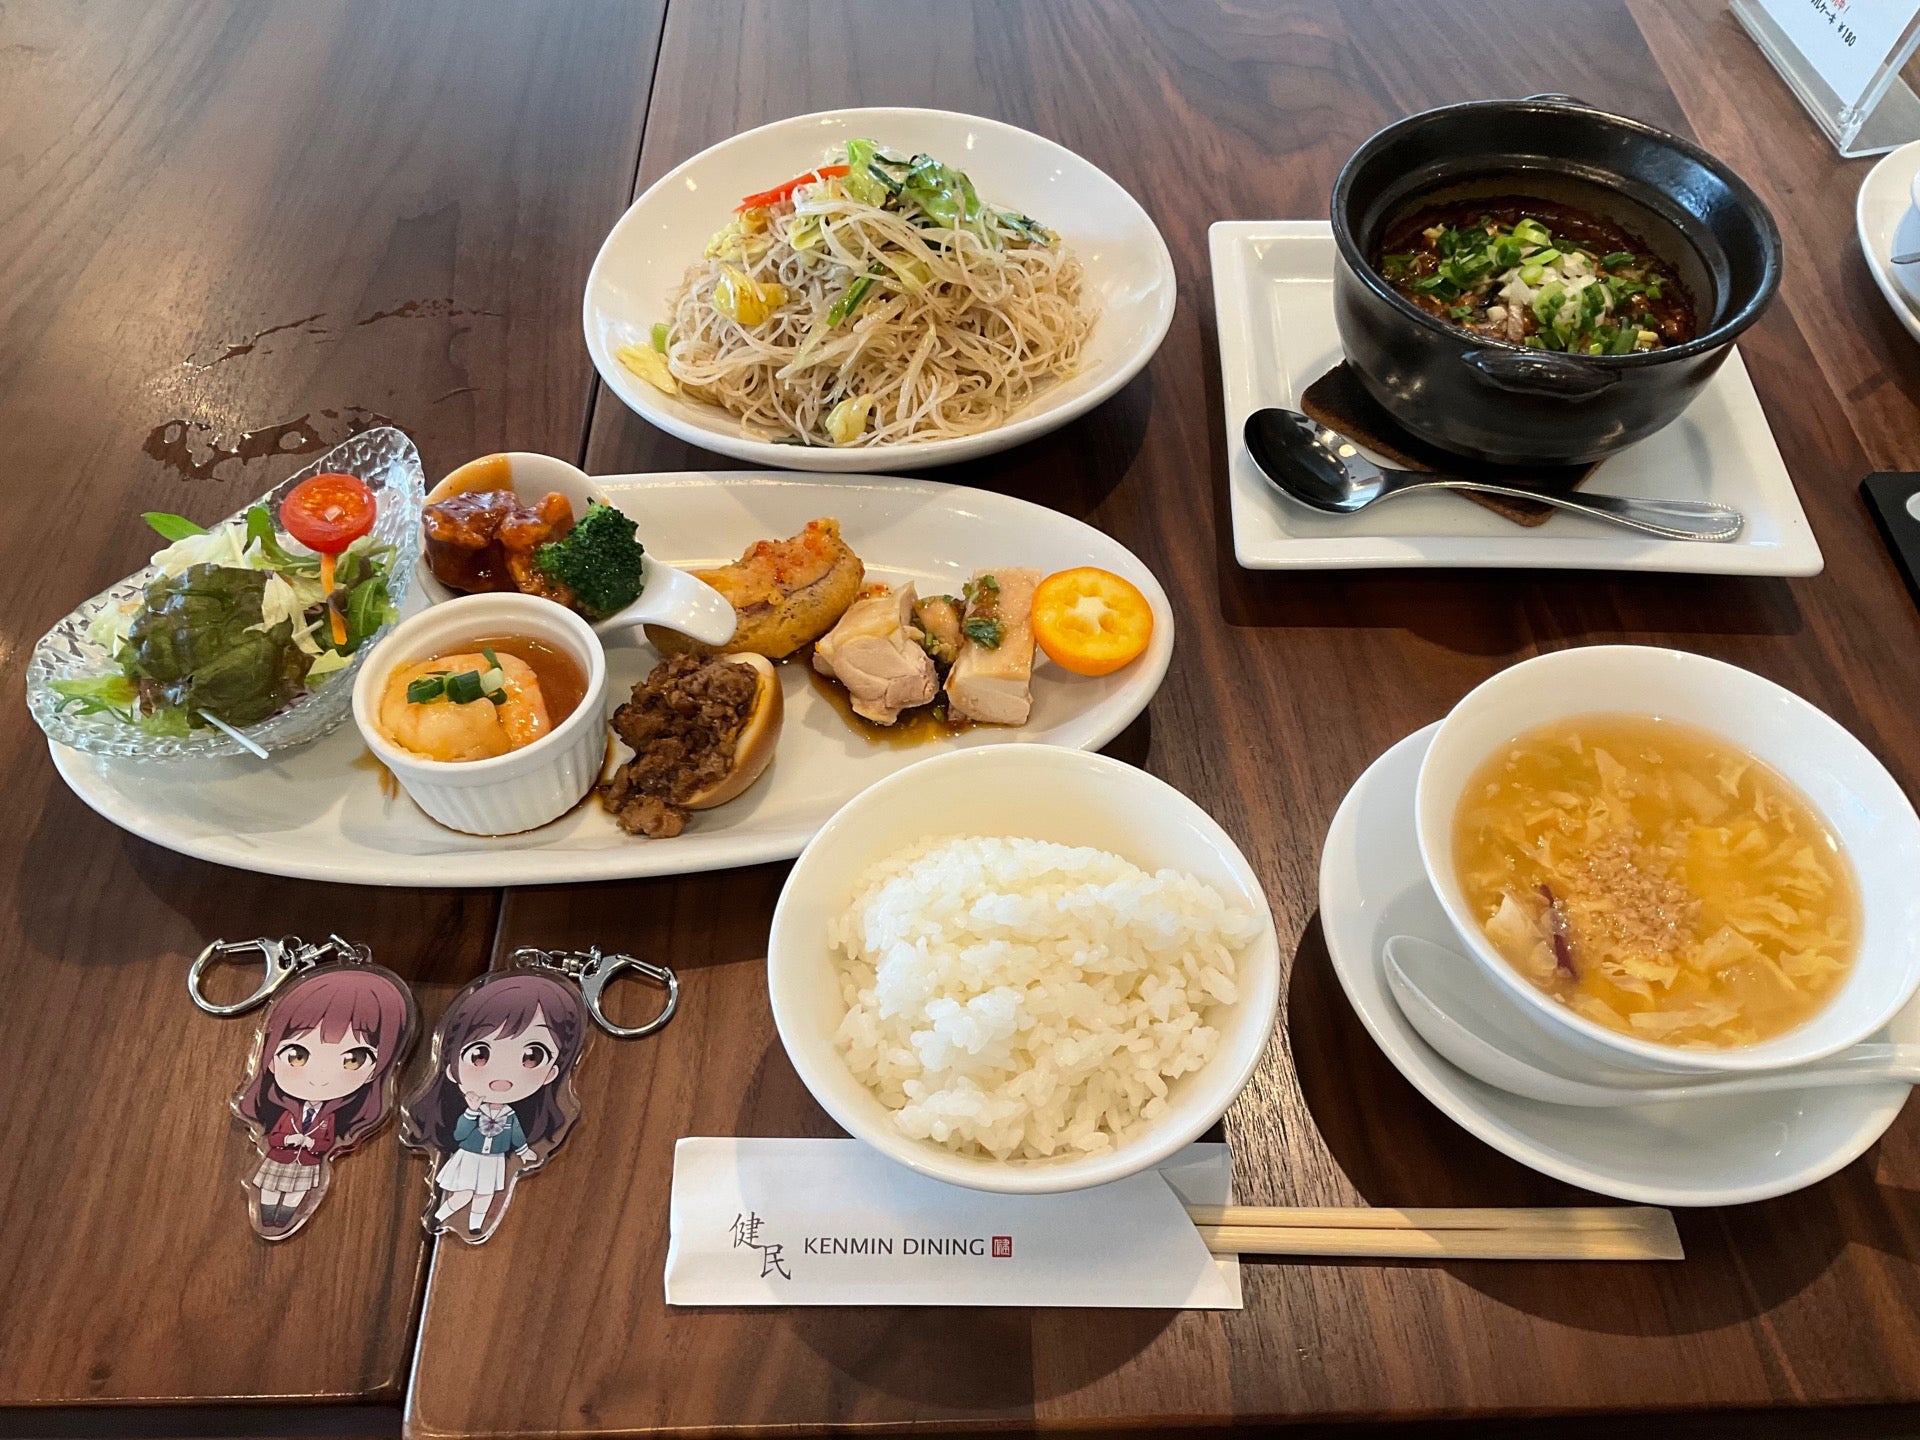 Kenmin Dining (健民ダイニング)